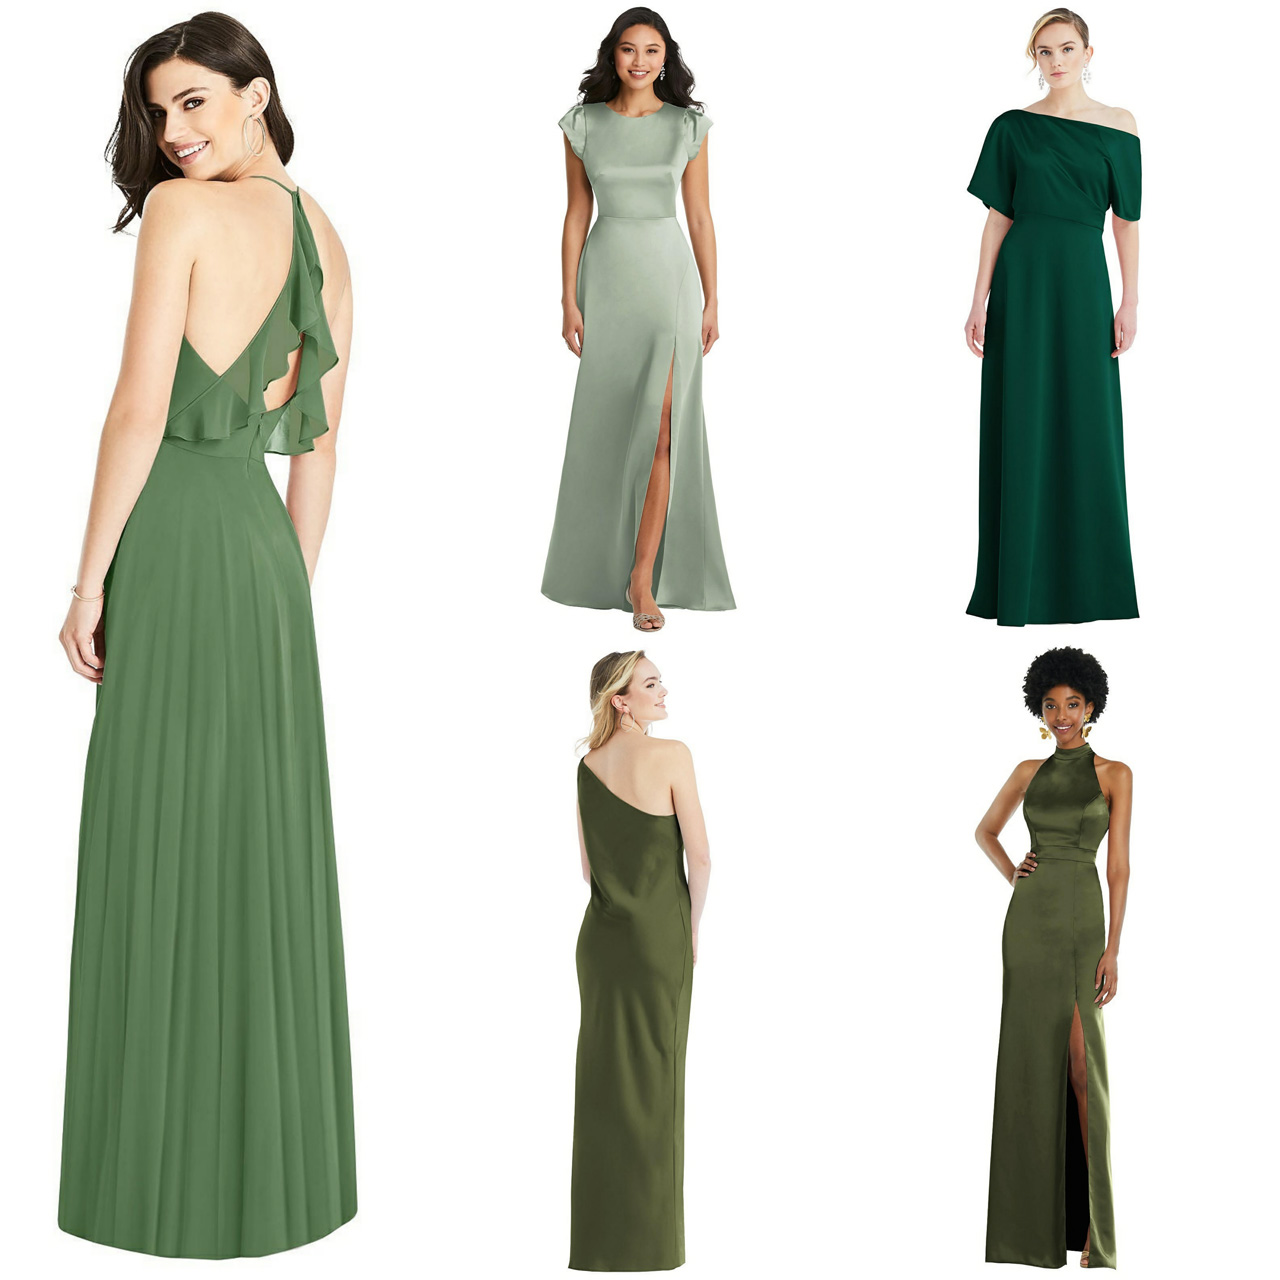 Green Bridesmaids Gowns in an Amazing Range of Styles